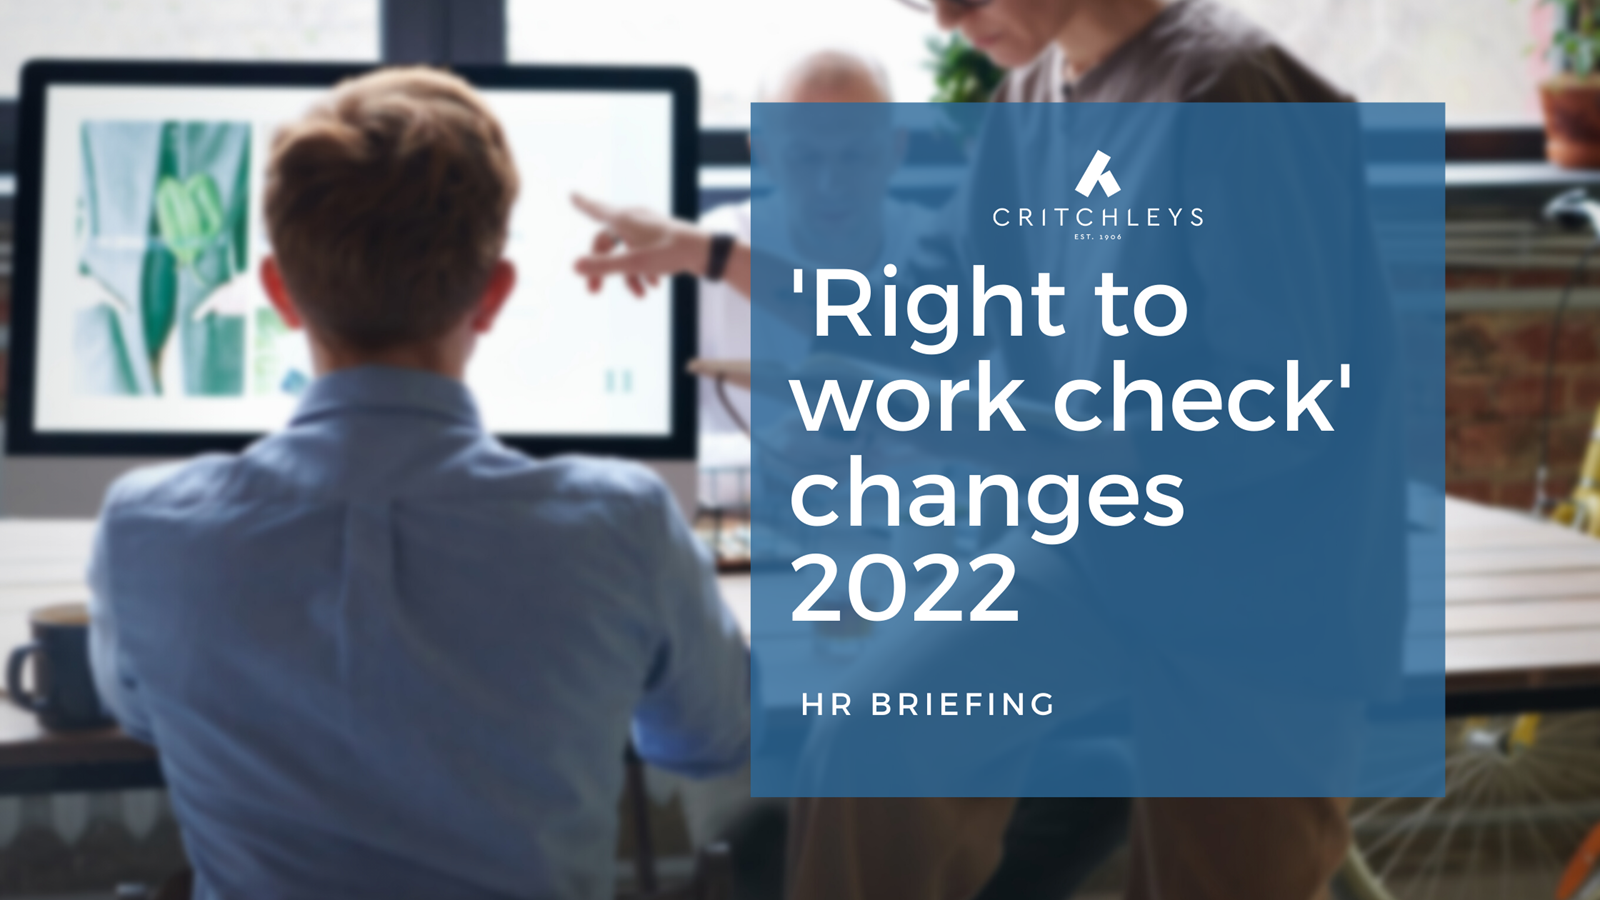 'Right to work check' changes 2022